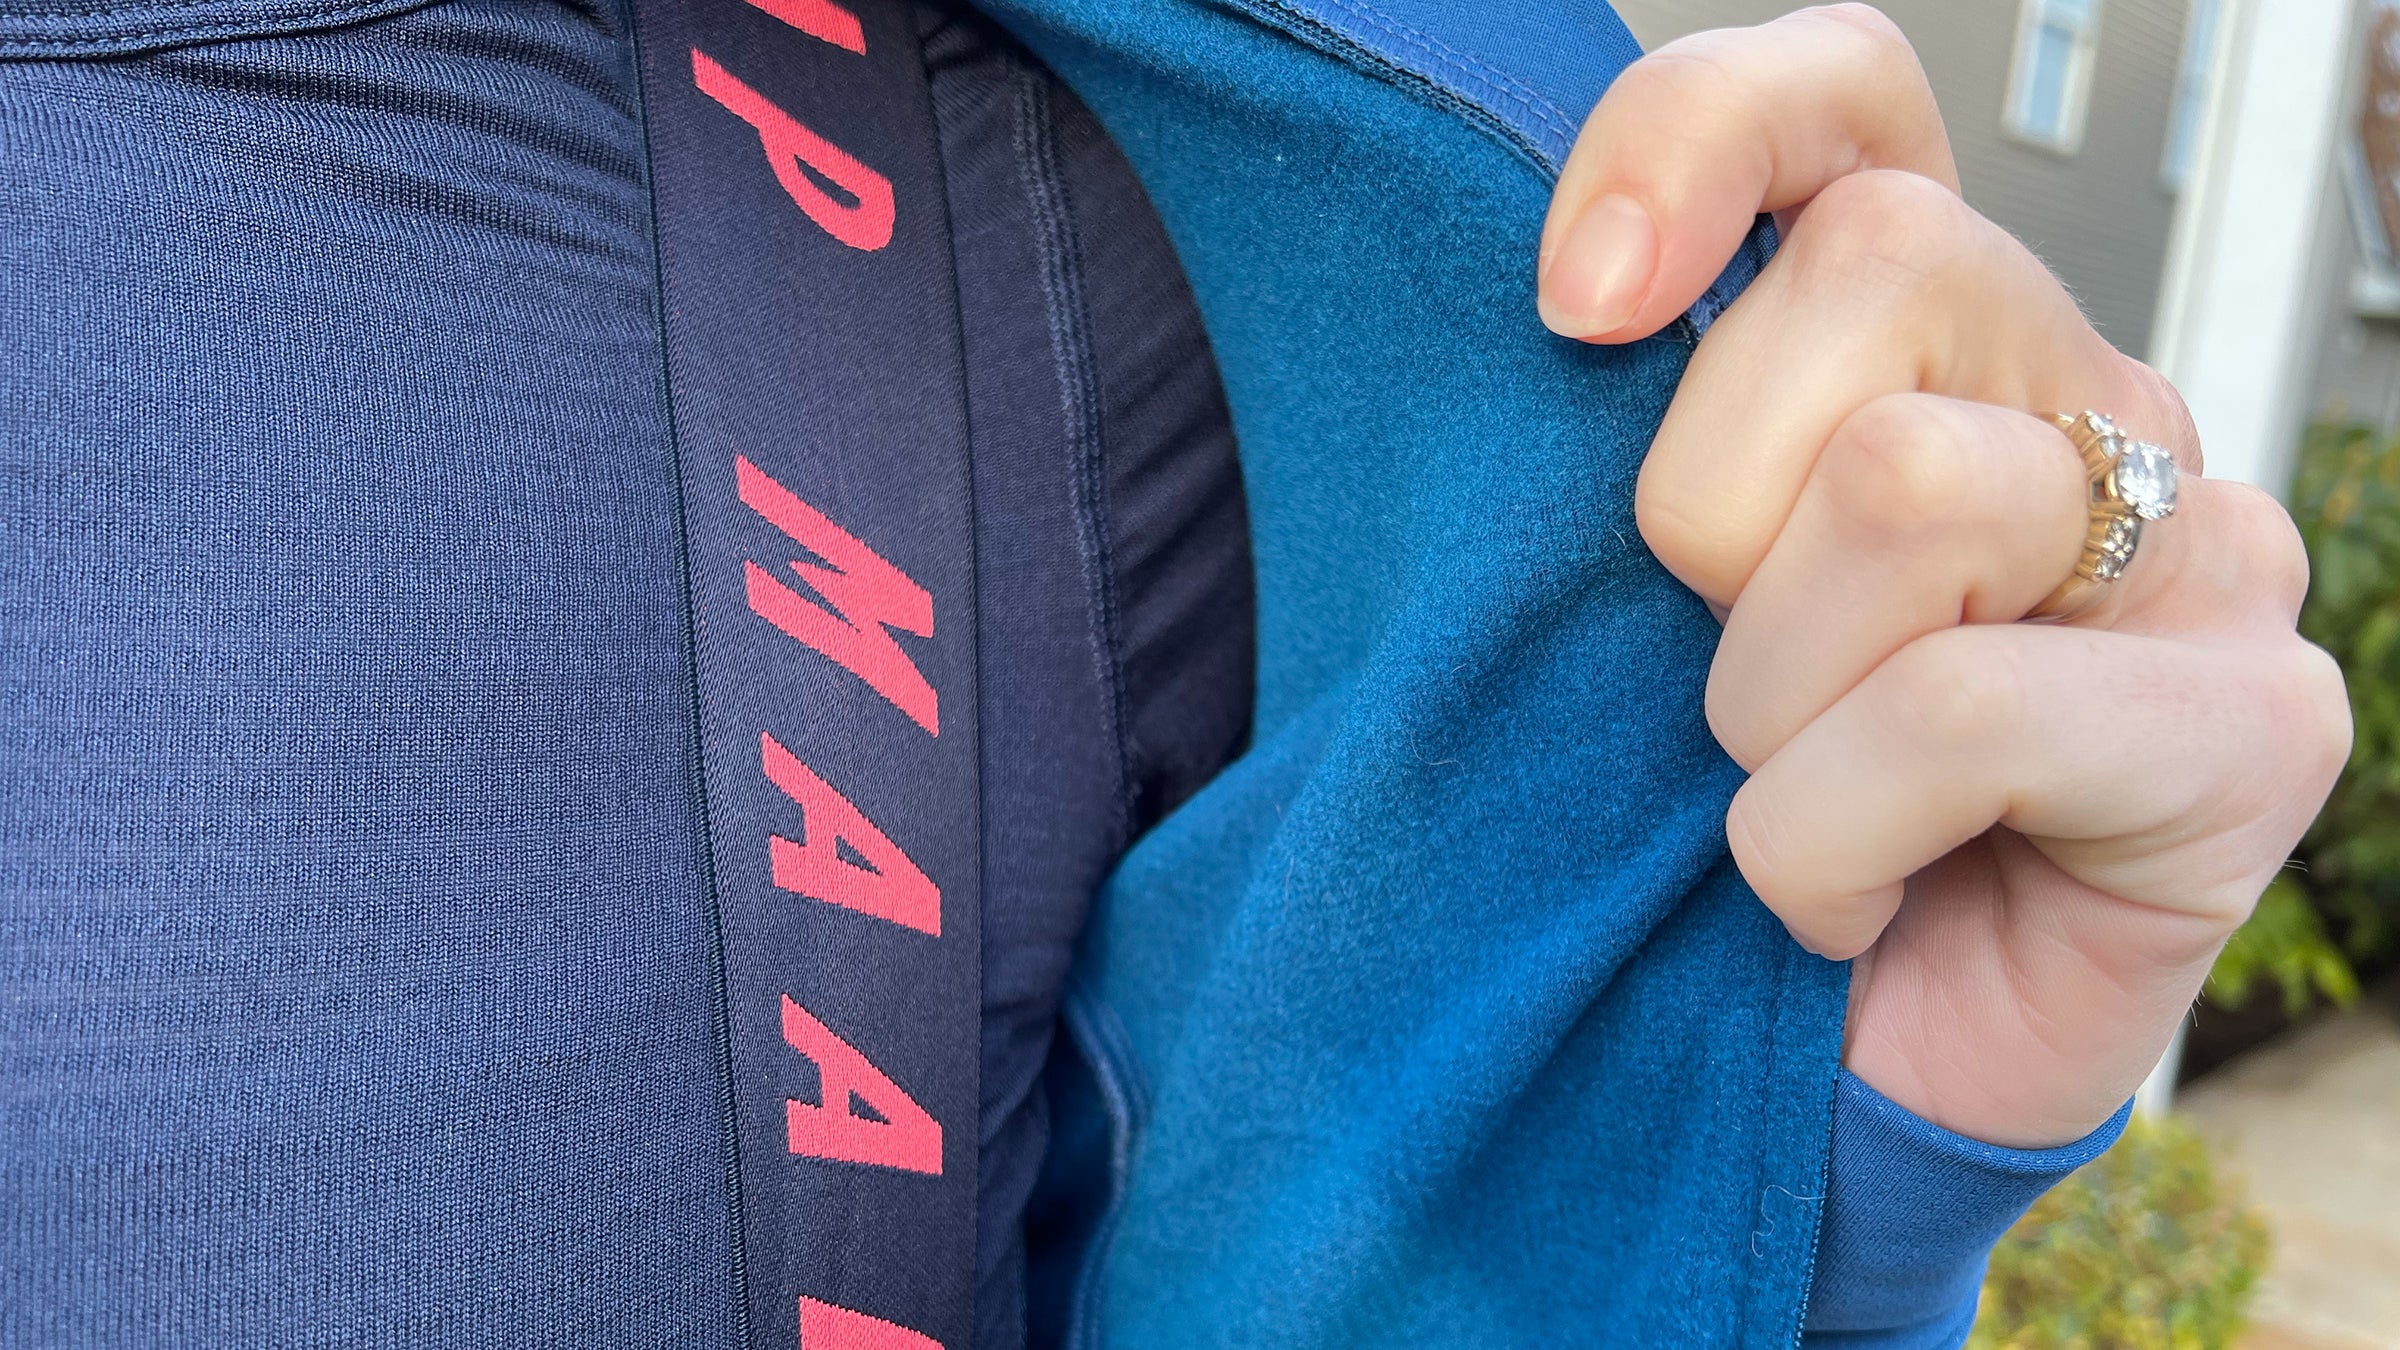 Maap Thermal base layer review: The power of Polartec